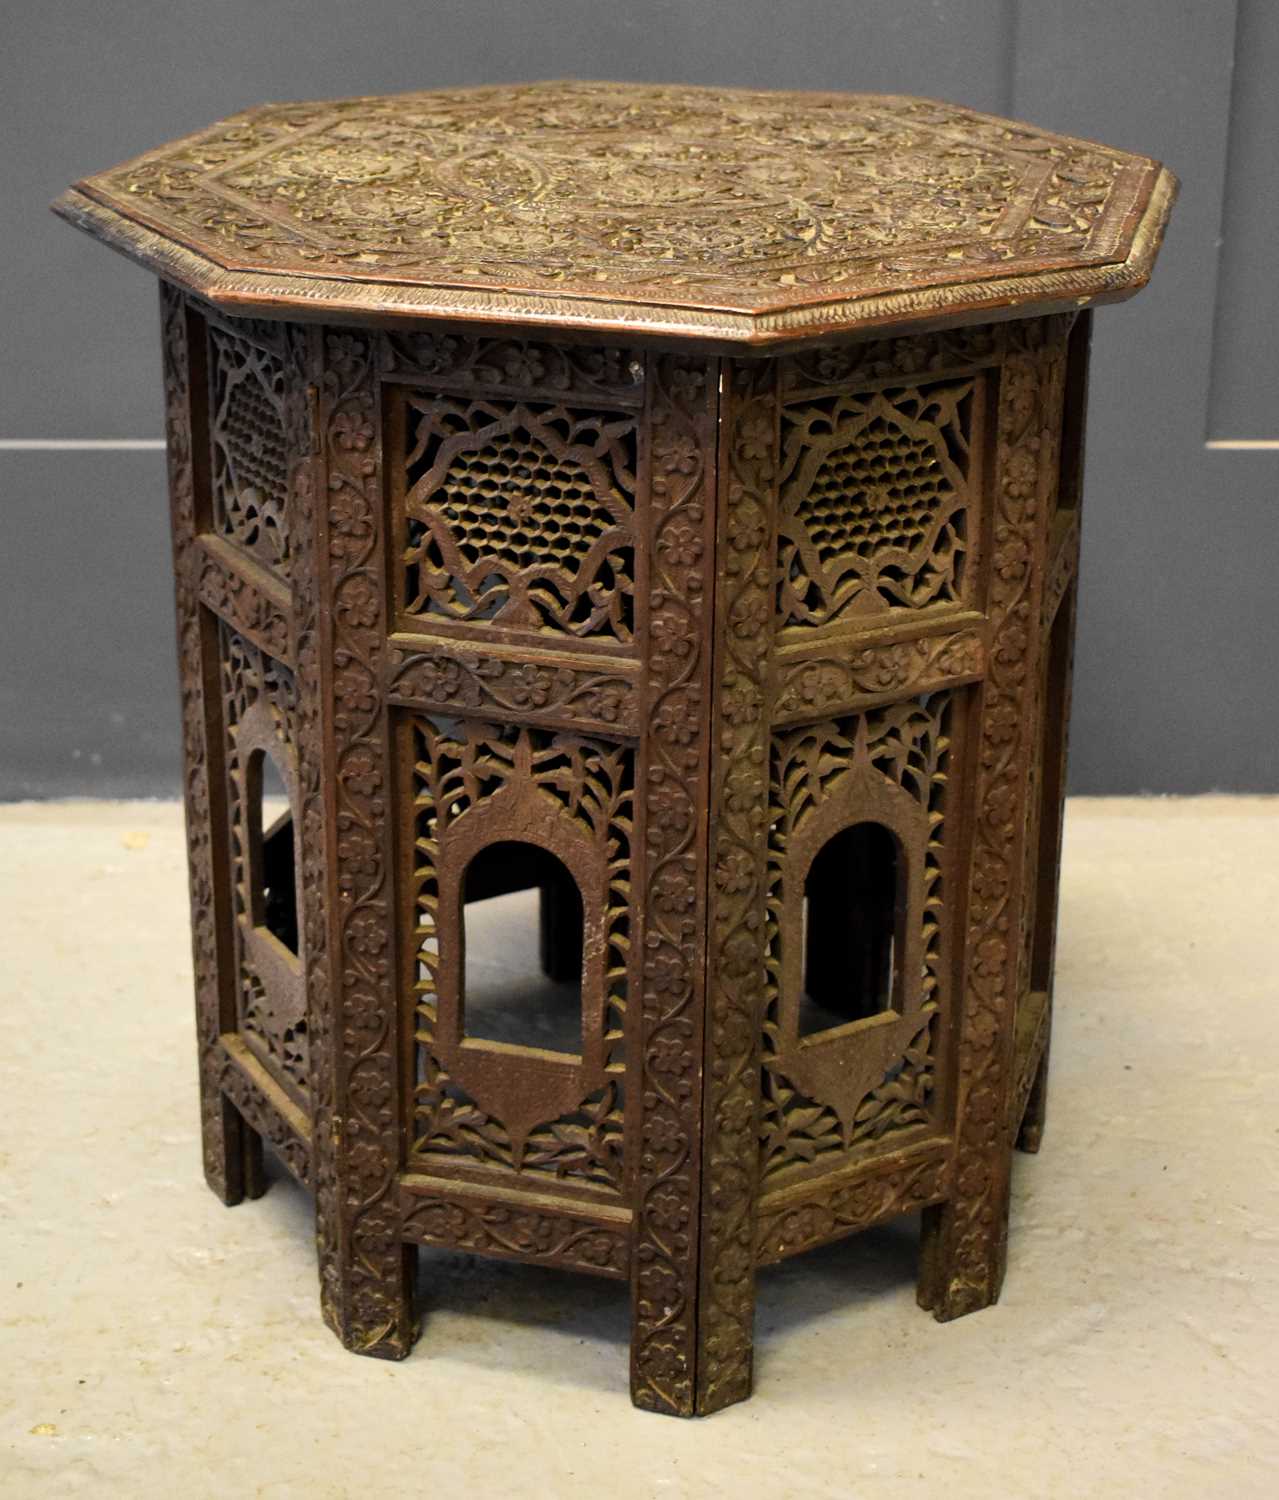 A small Indian carved table with folding base composed of pierced decorative panels and having an